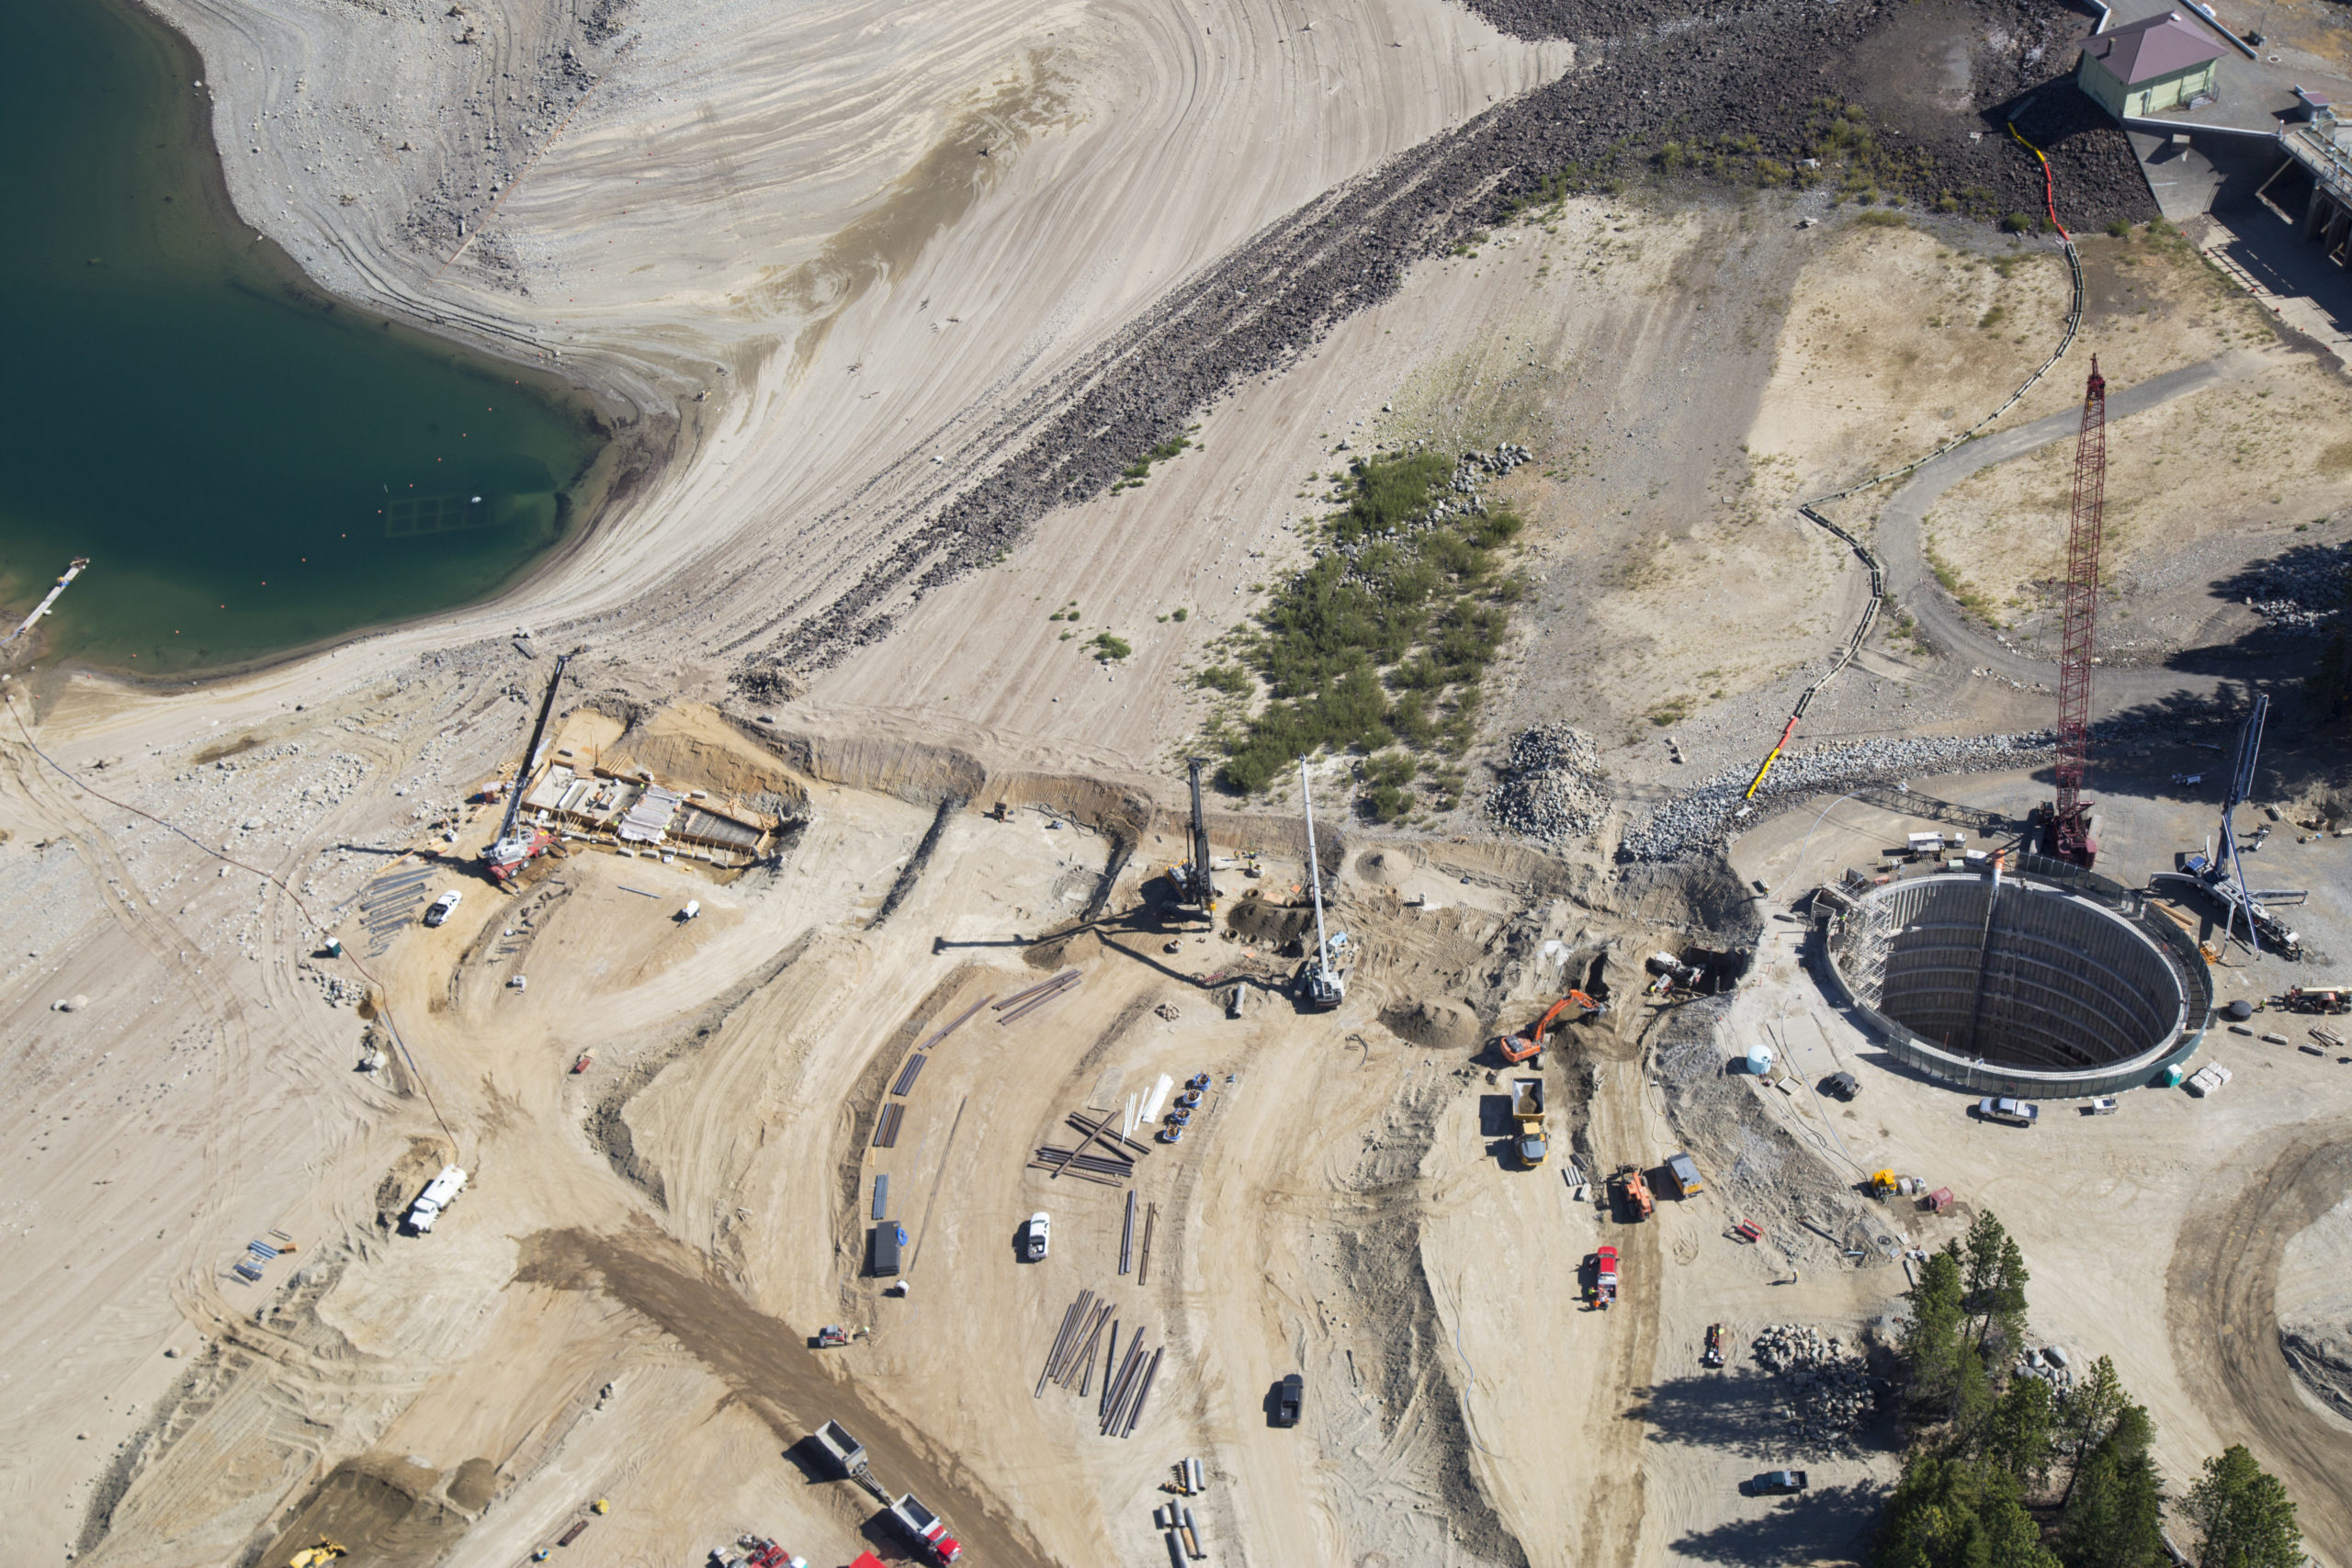 An aerial view of the construction site near the water in Cle Elum, Washington.